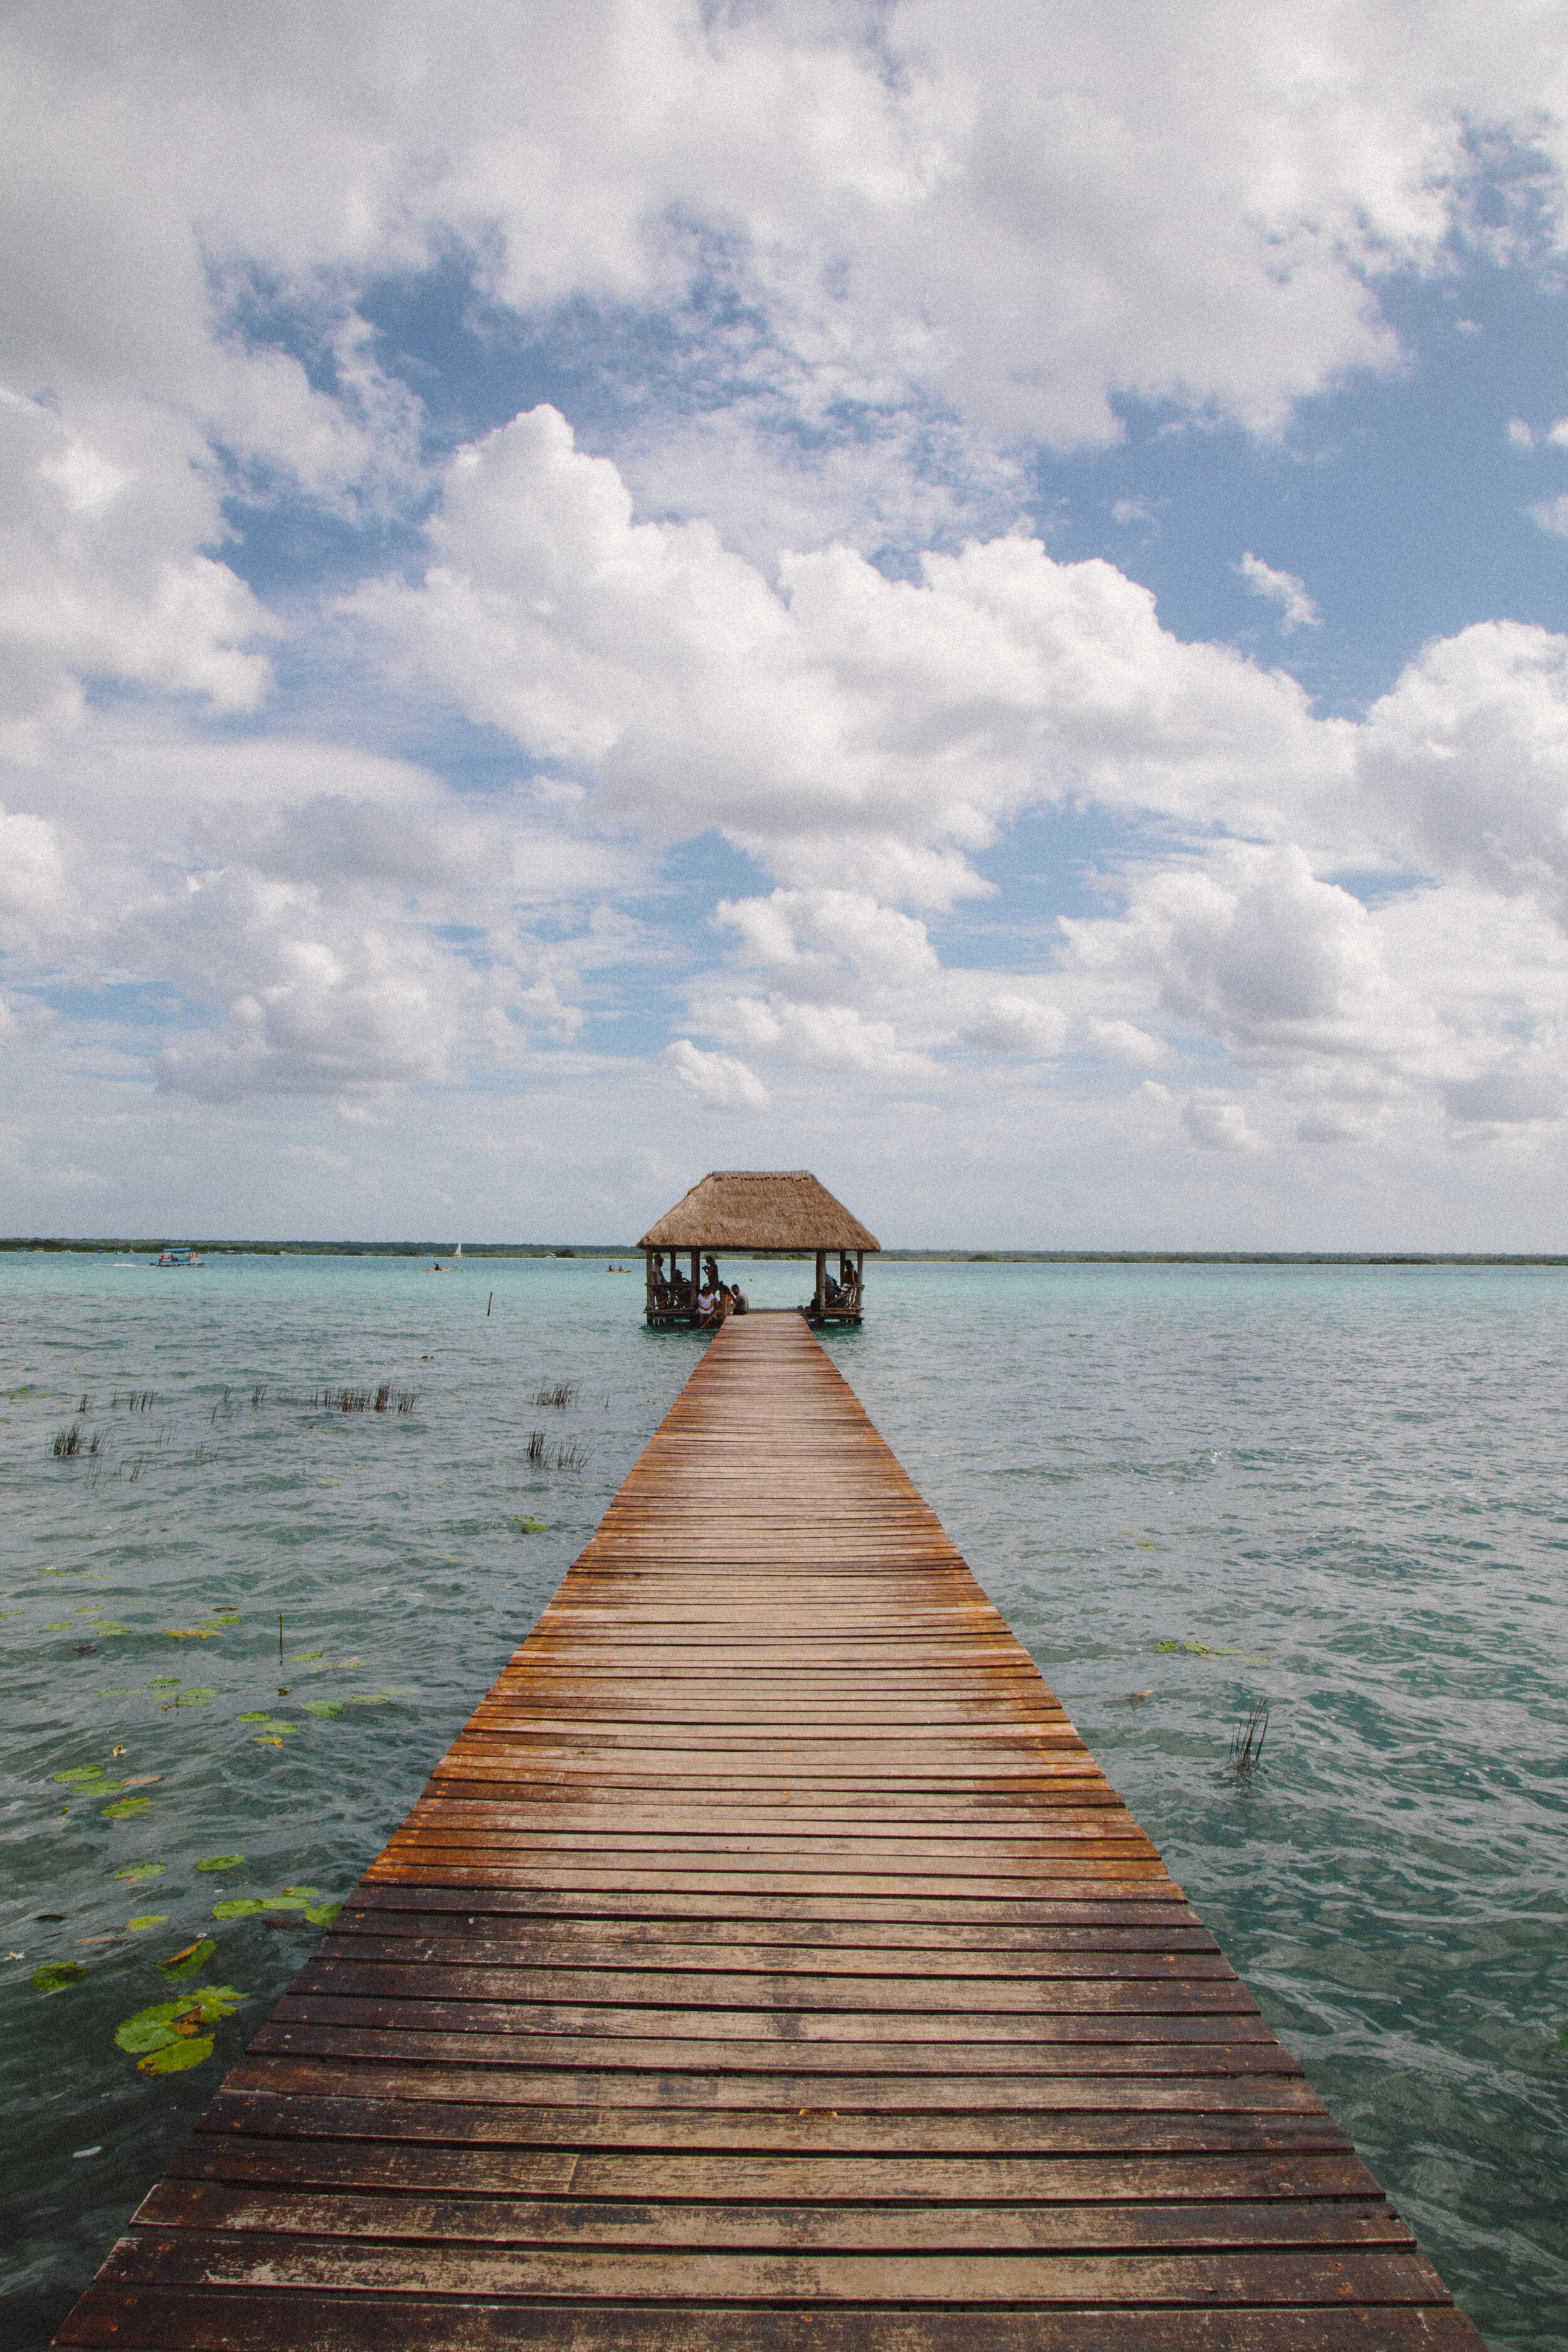 One of the many docks in Bacalar.